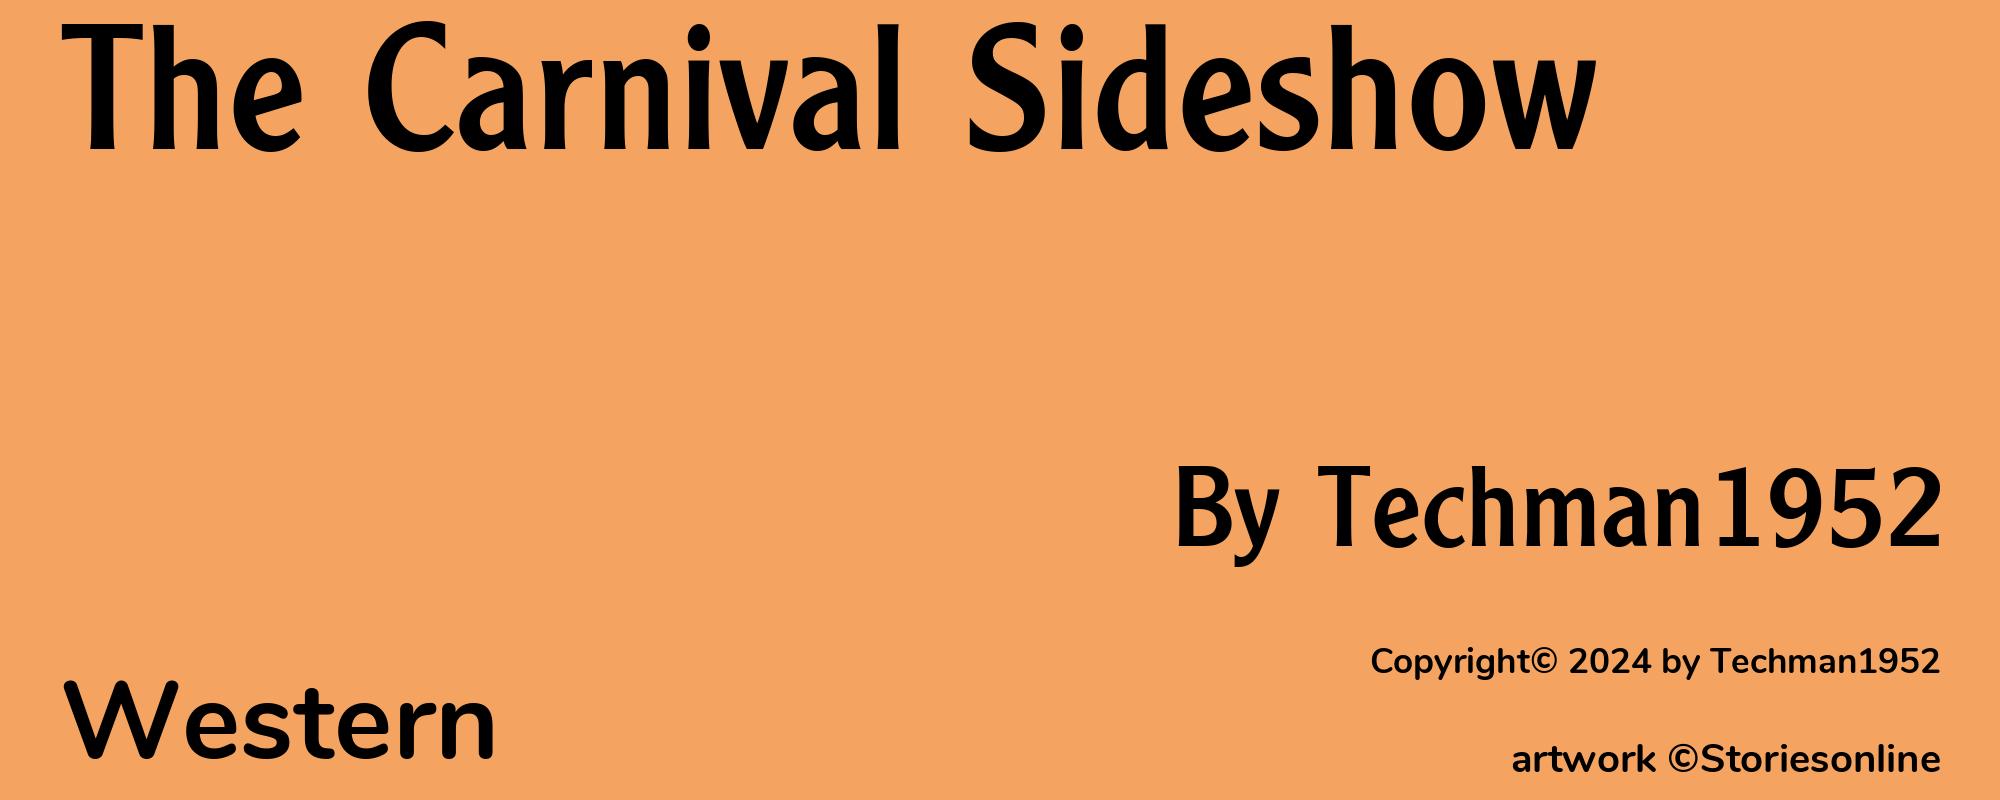 The Carnival Sideshow - Cover